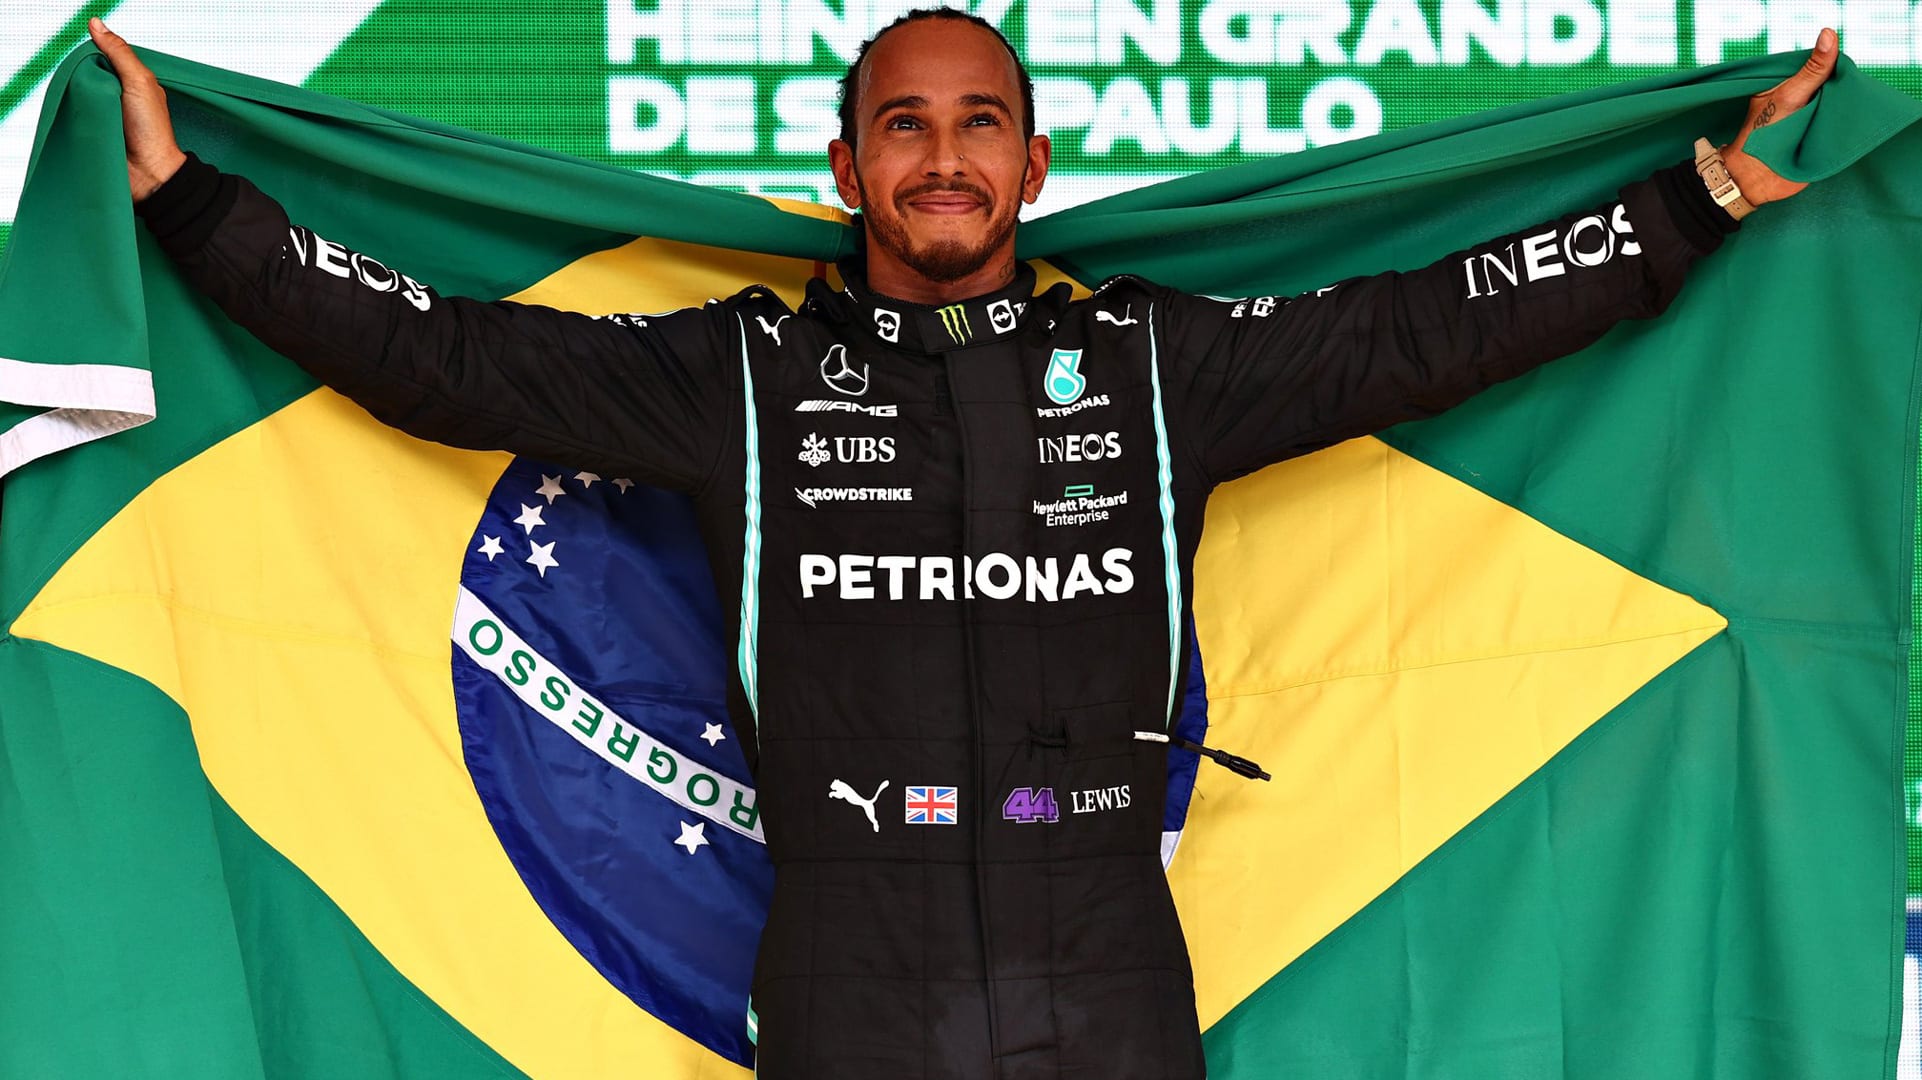 I don't remember another weekend like this' says Hamilton after sensational  last-to-first comeback in Brazil | Formula 1®